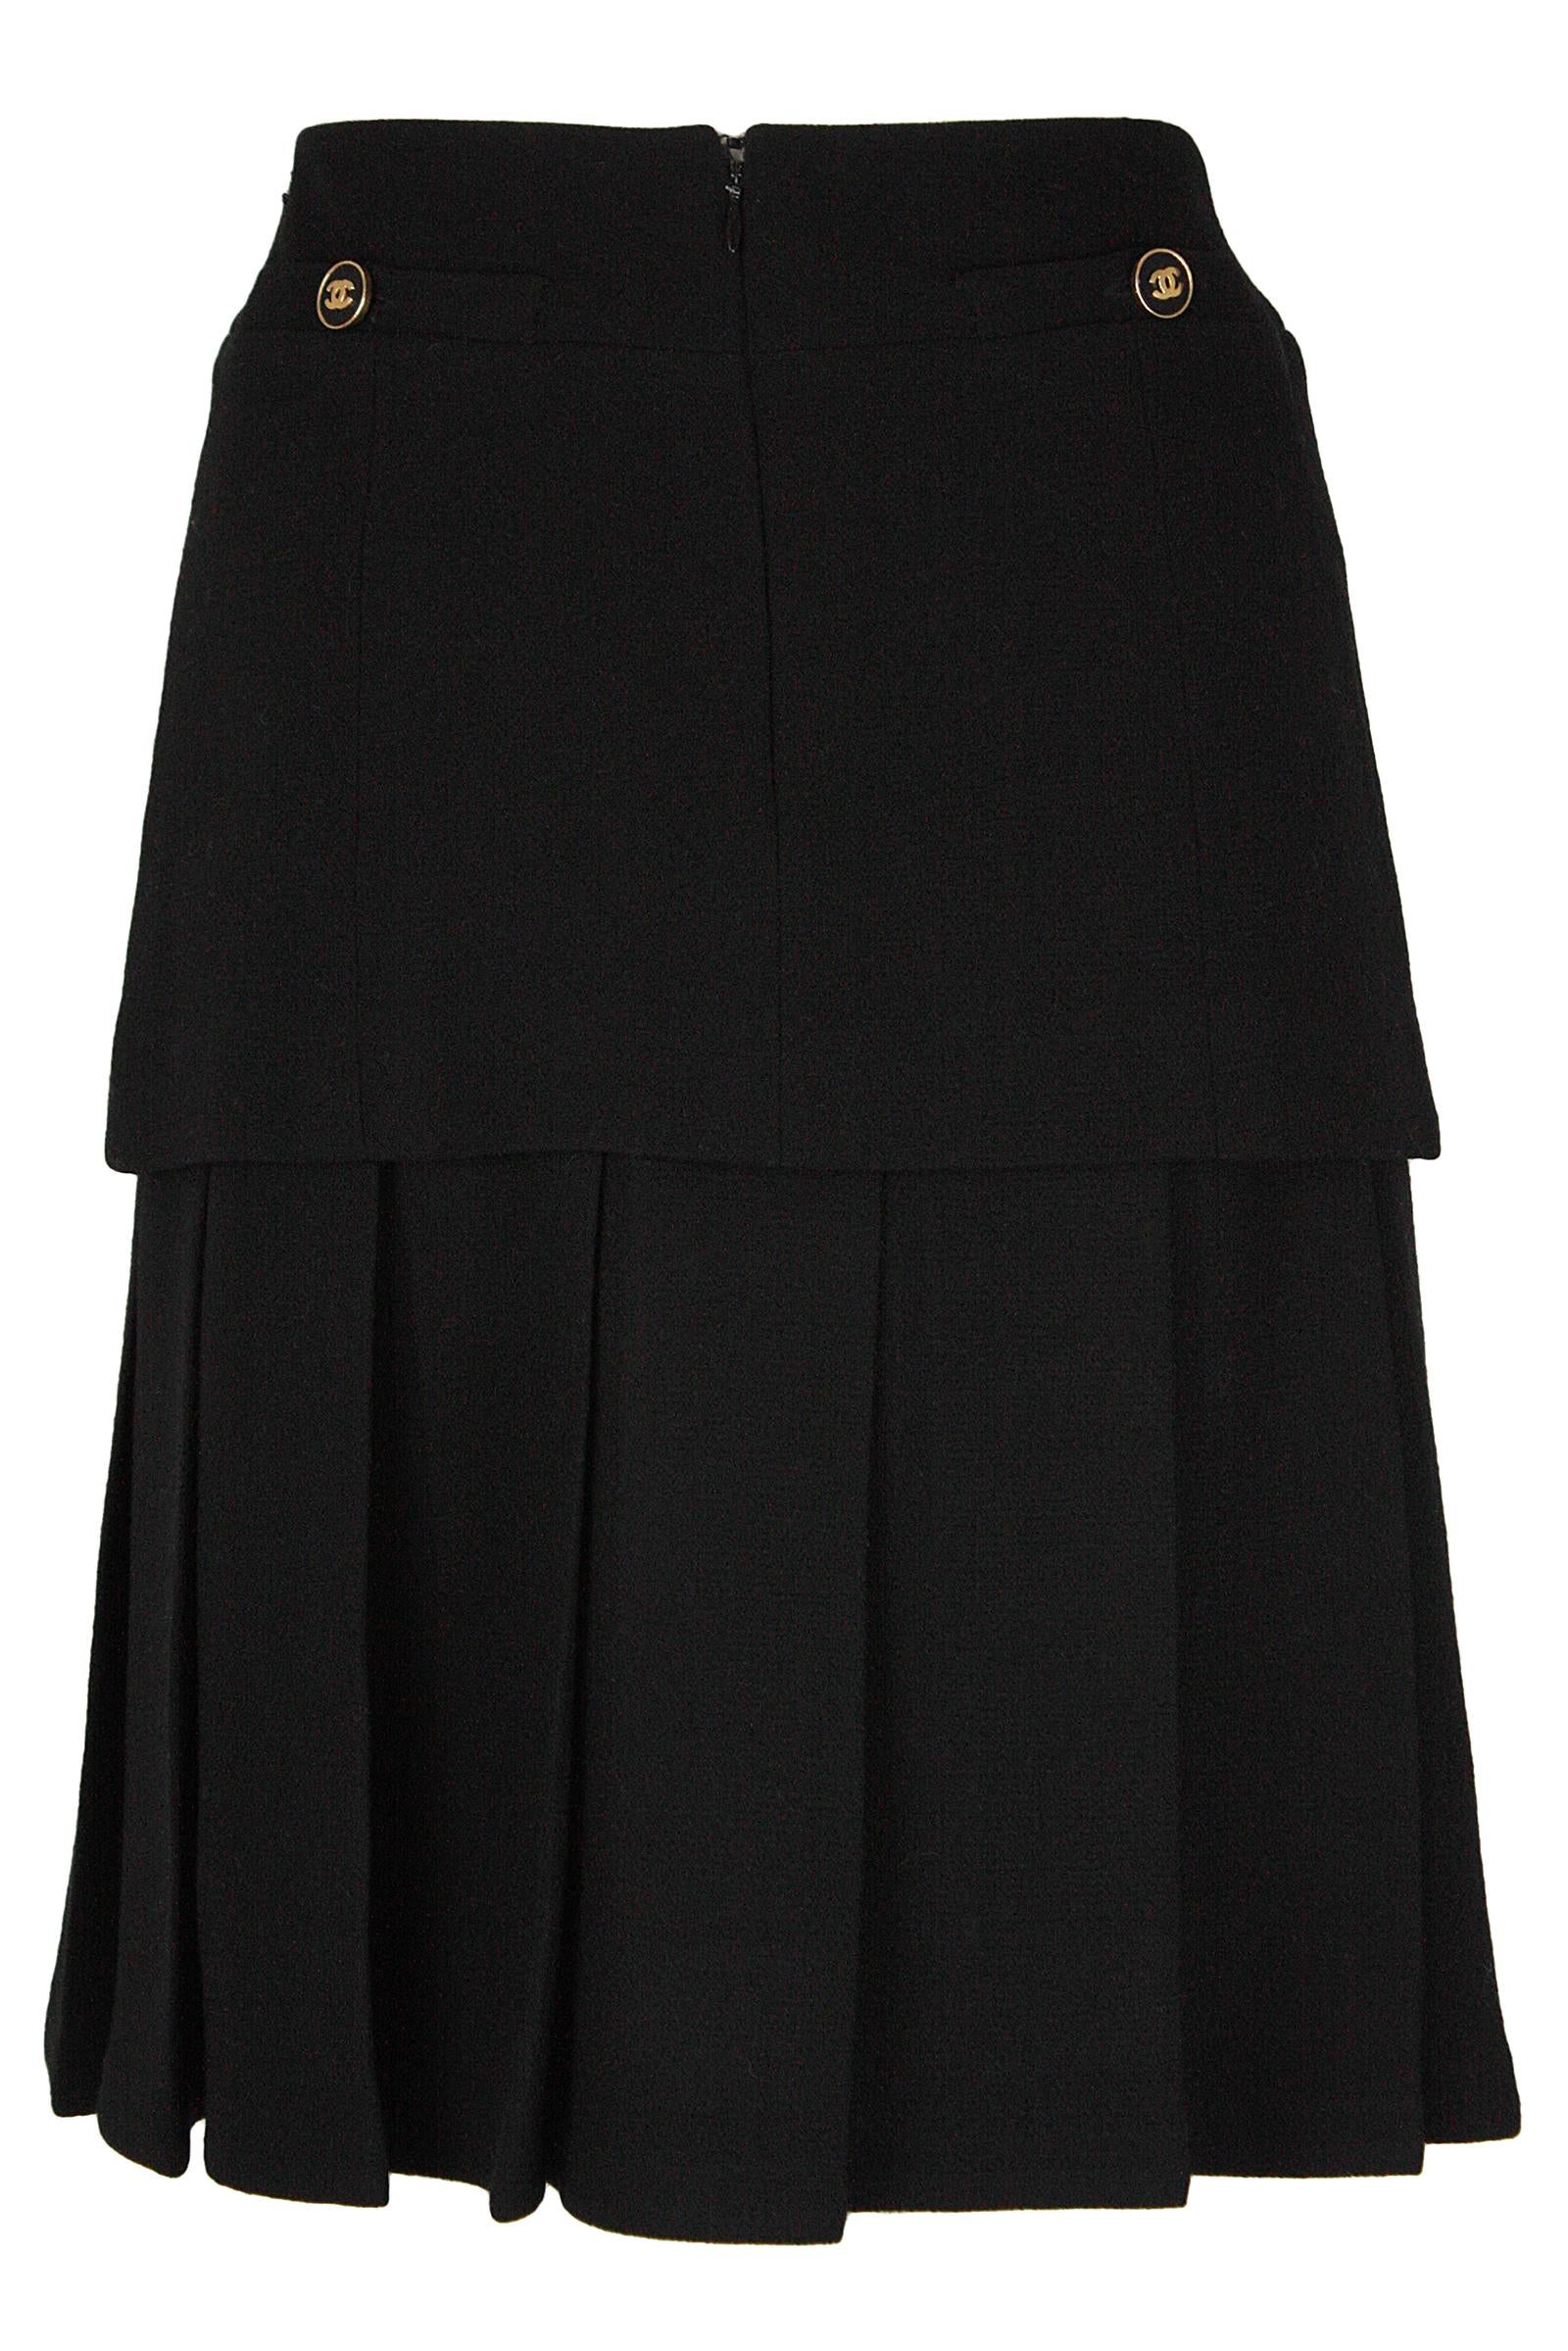 Chanel skirt 
Black wool crepe 
Pleats and panel design 
Back zipper and hook and eye closure 
Gold CC buttons on back faux pockets 
Made in France 
